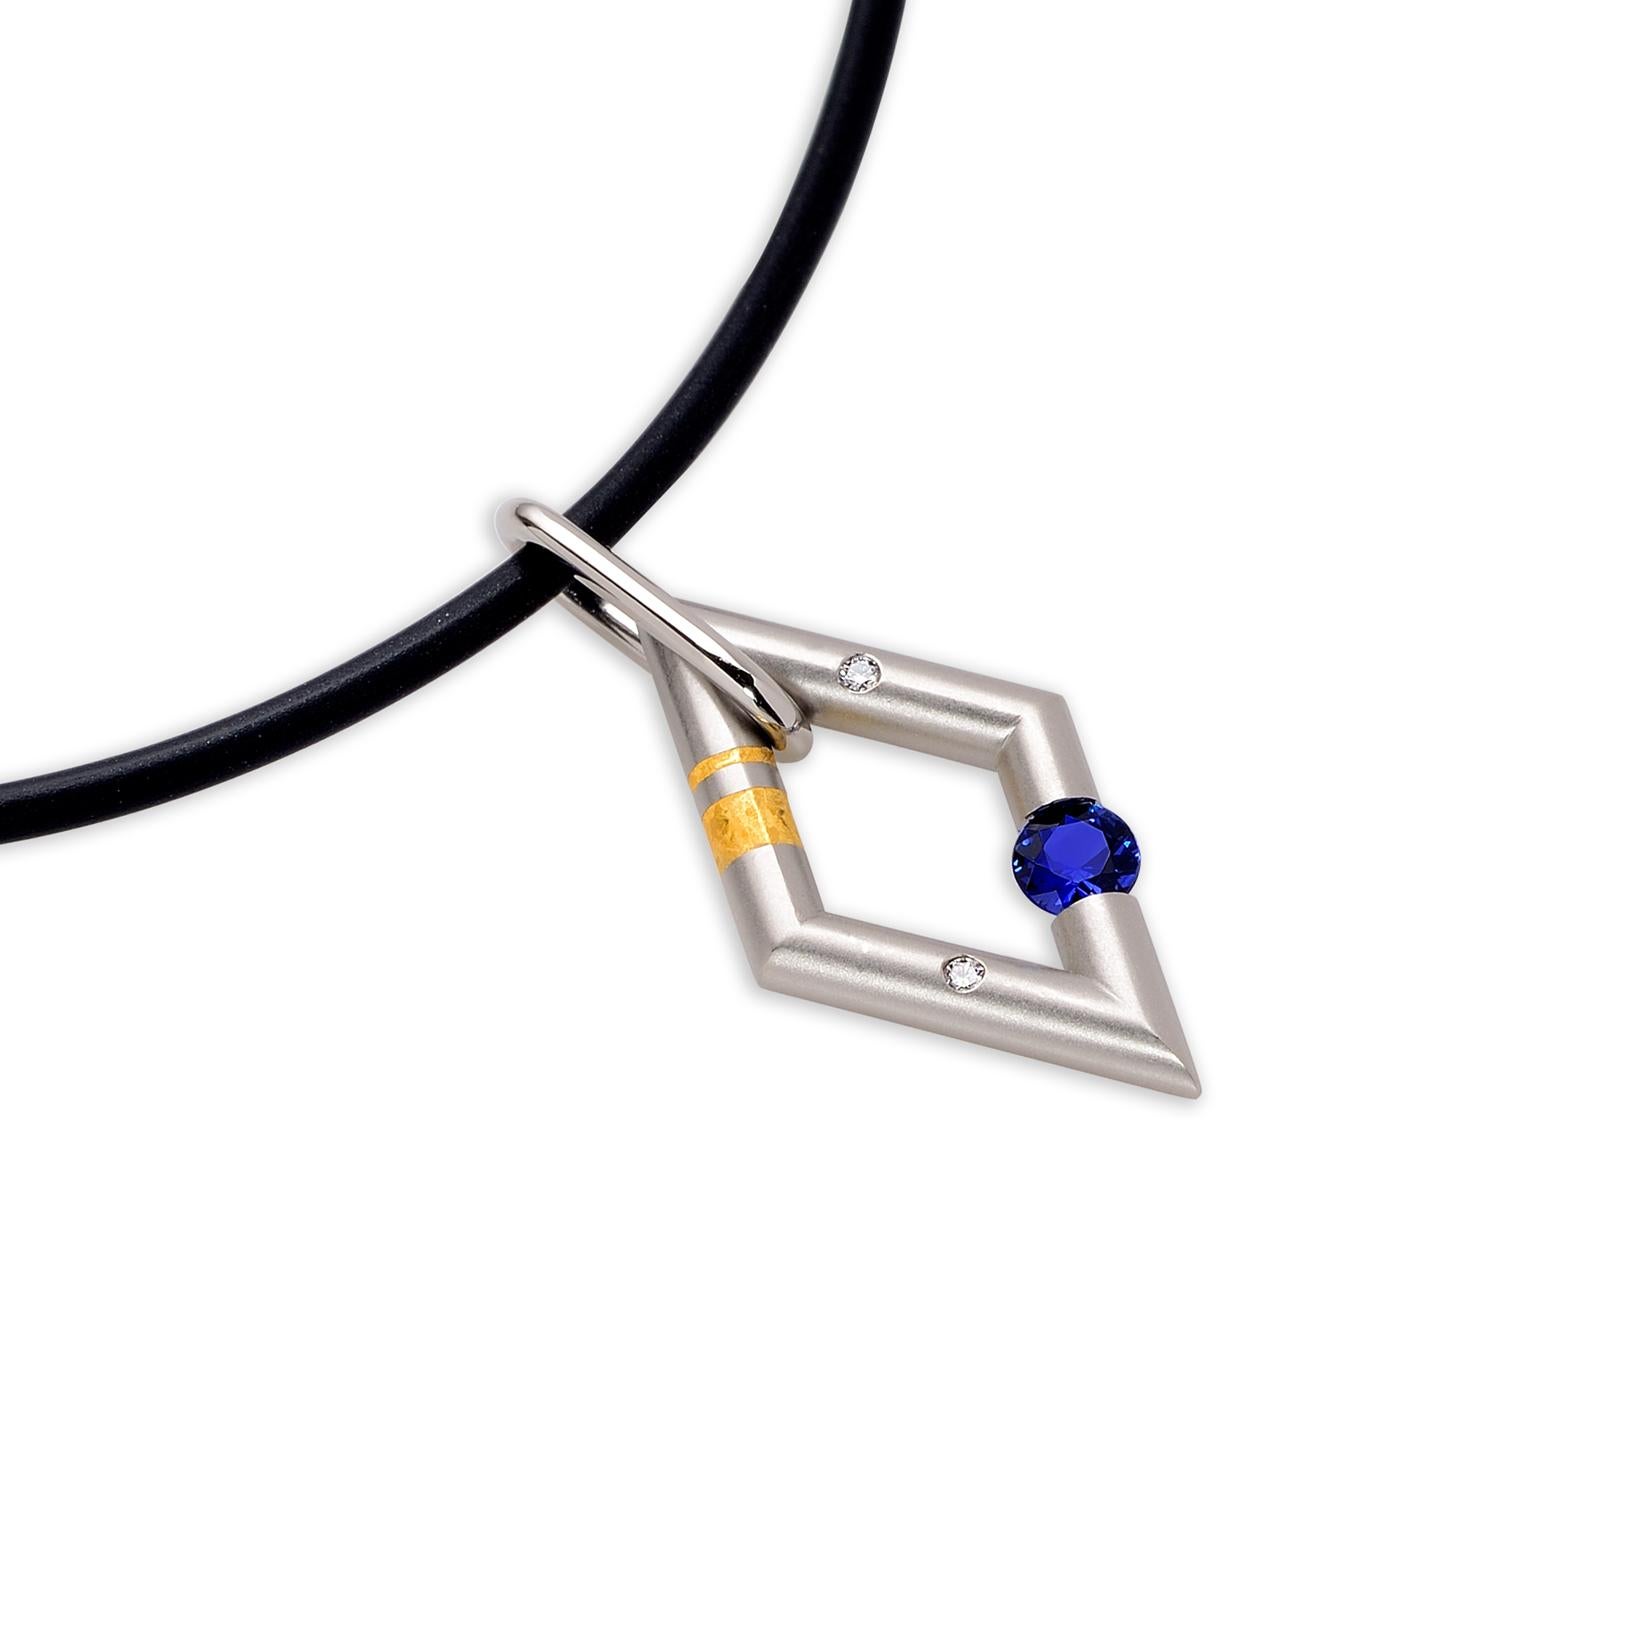 The Steven Kretchmer Diamond Shaped Pendant with a tension-set blue sapphire is handcrafted in satin platinum with a shiny platinum bail and 24K crystalized gold inlay. The 0.28 ct. blue sapphire is 4mm in diameter and is classic royal blue that